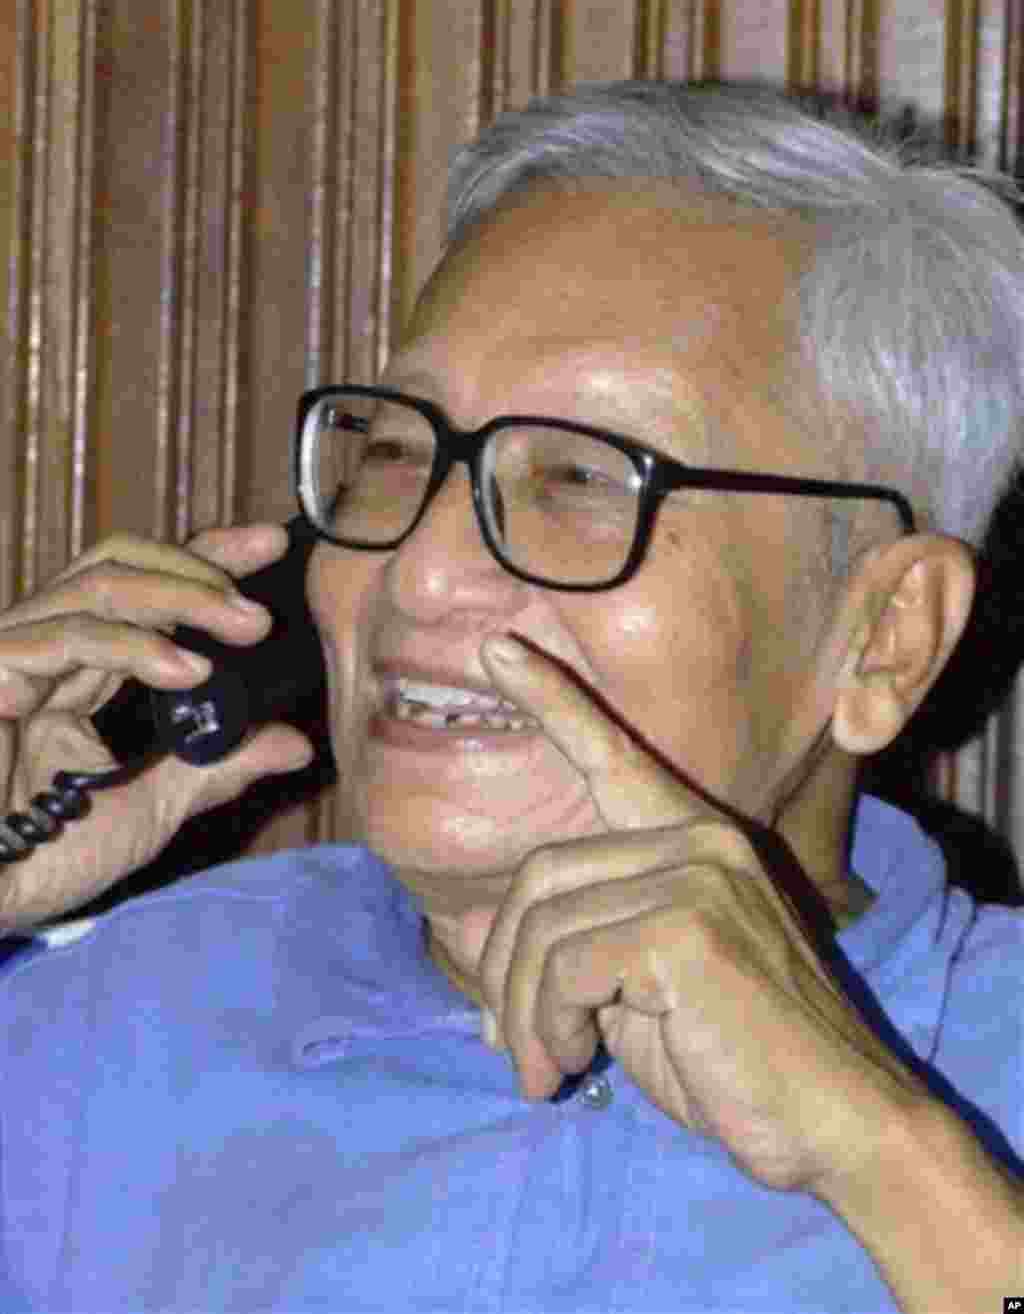 Myanmar's political prisoner Win Tin, 78, smiles as he speaks on a telephone at his friend's house following his release in Yangon, MyanmarTuesday Sept. 23, 2008. Myanmar's longest-serving political prisoner, journalist Win Tin, was freed Tuesday after 19